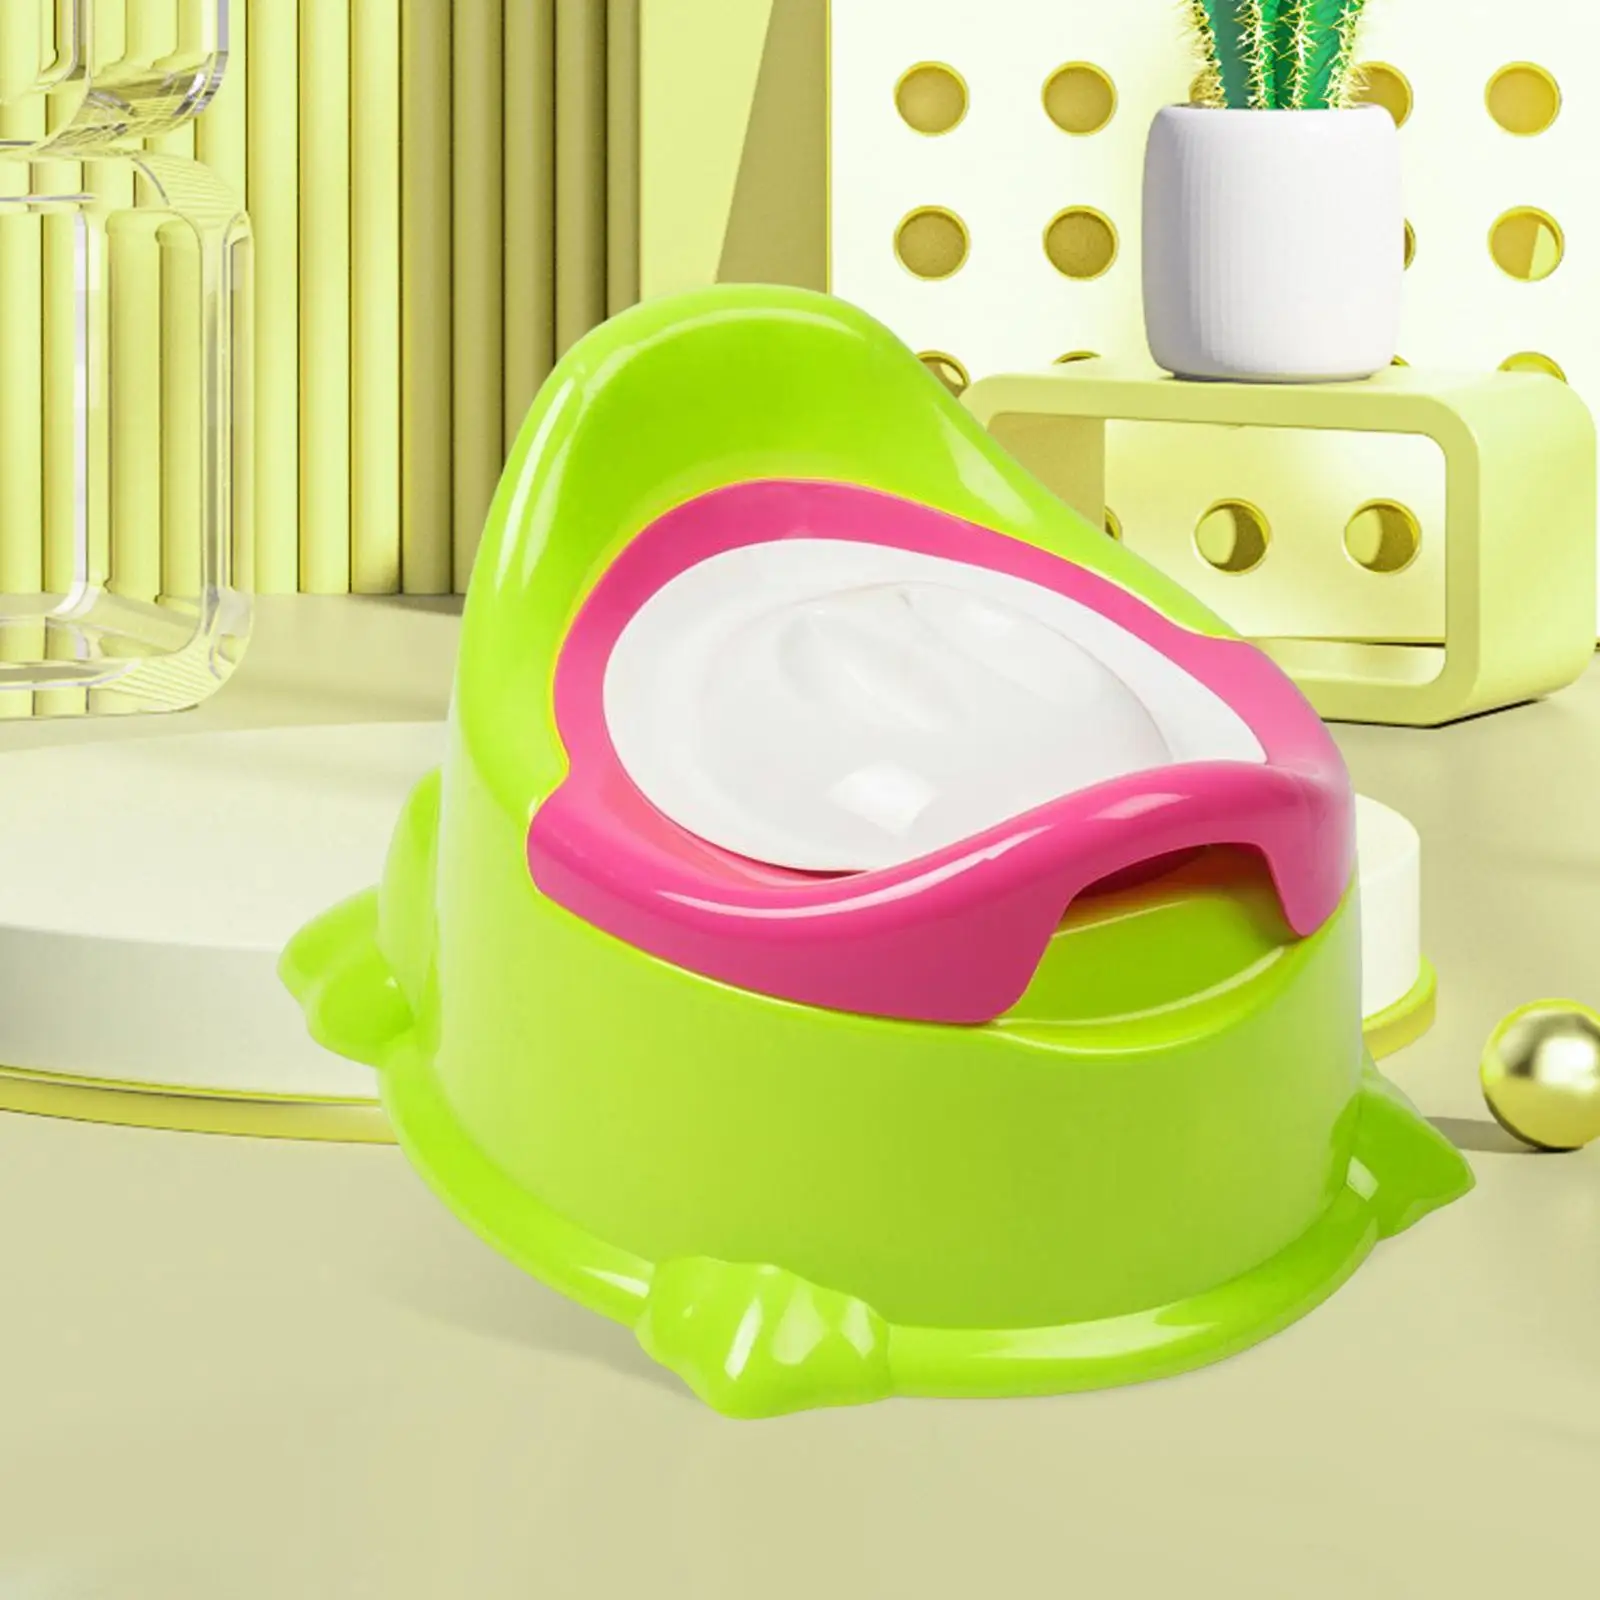 Child Training Toilet Seat Stable for Babies 6-12 Month Toddlers